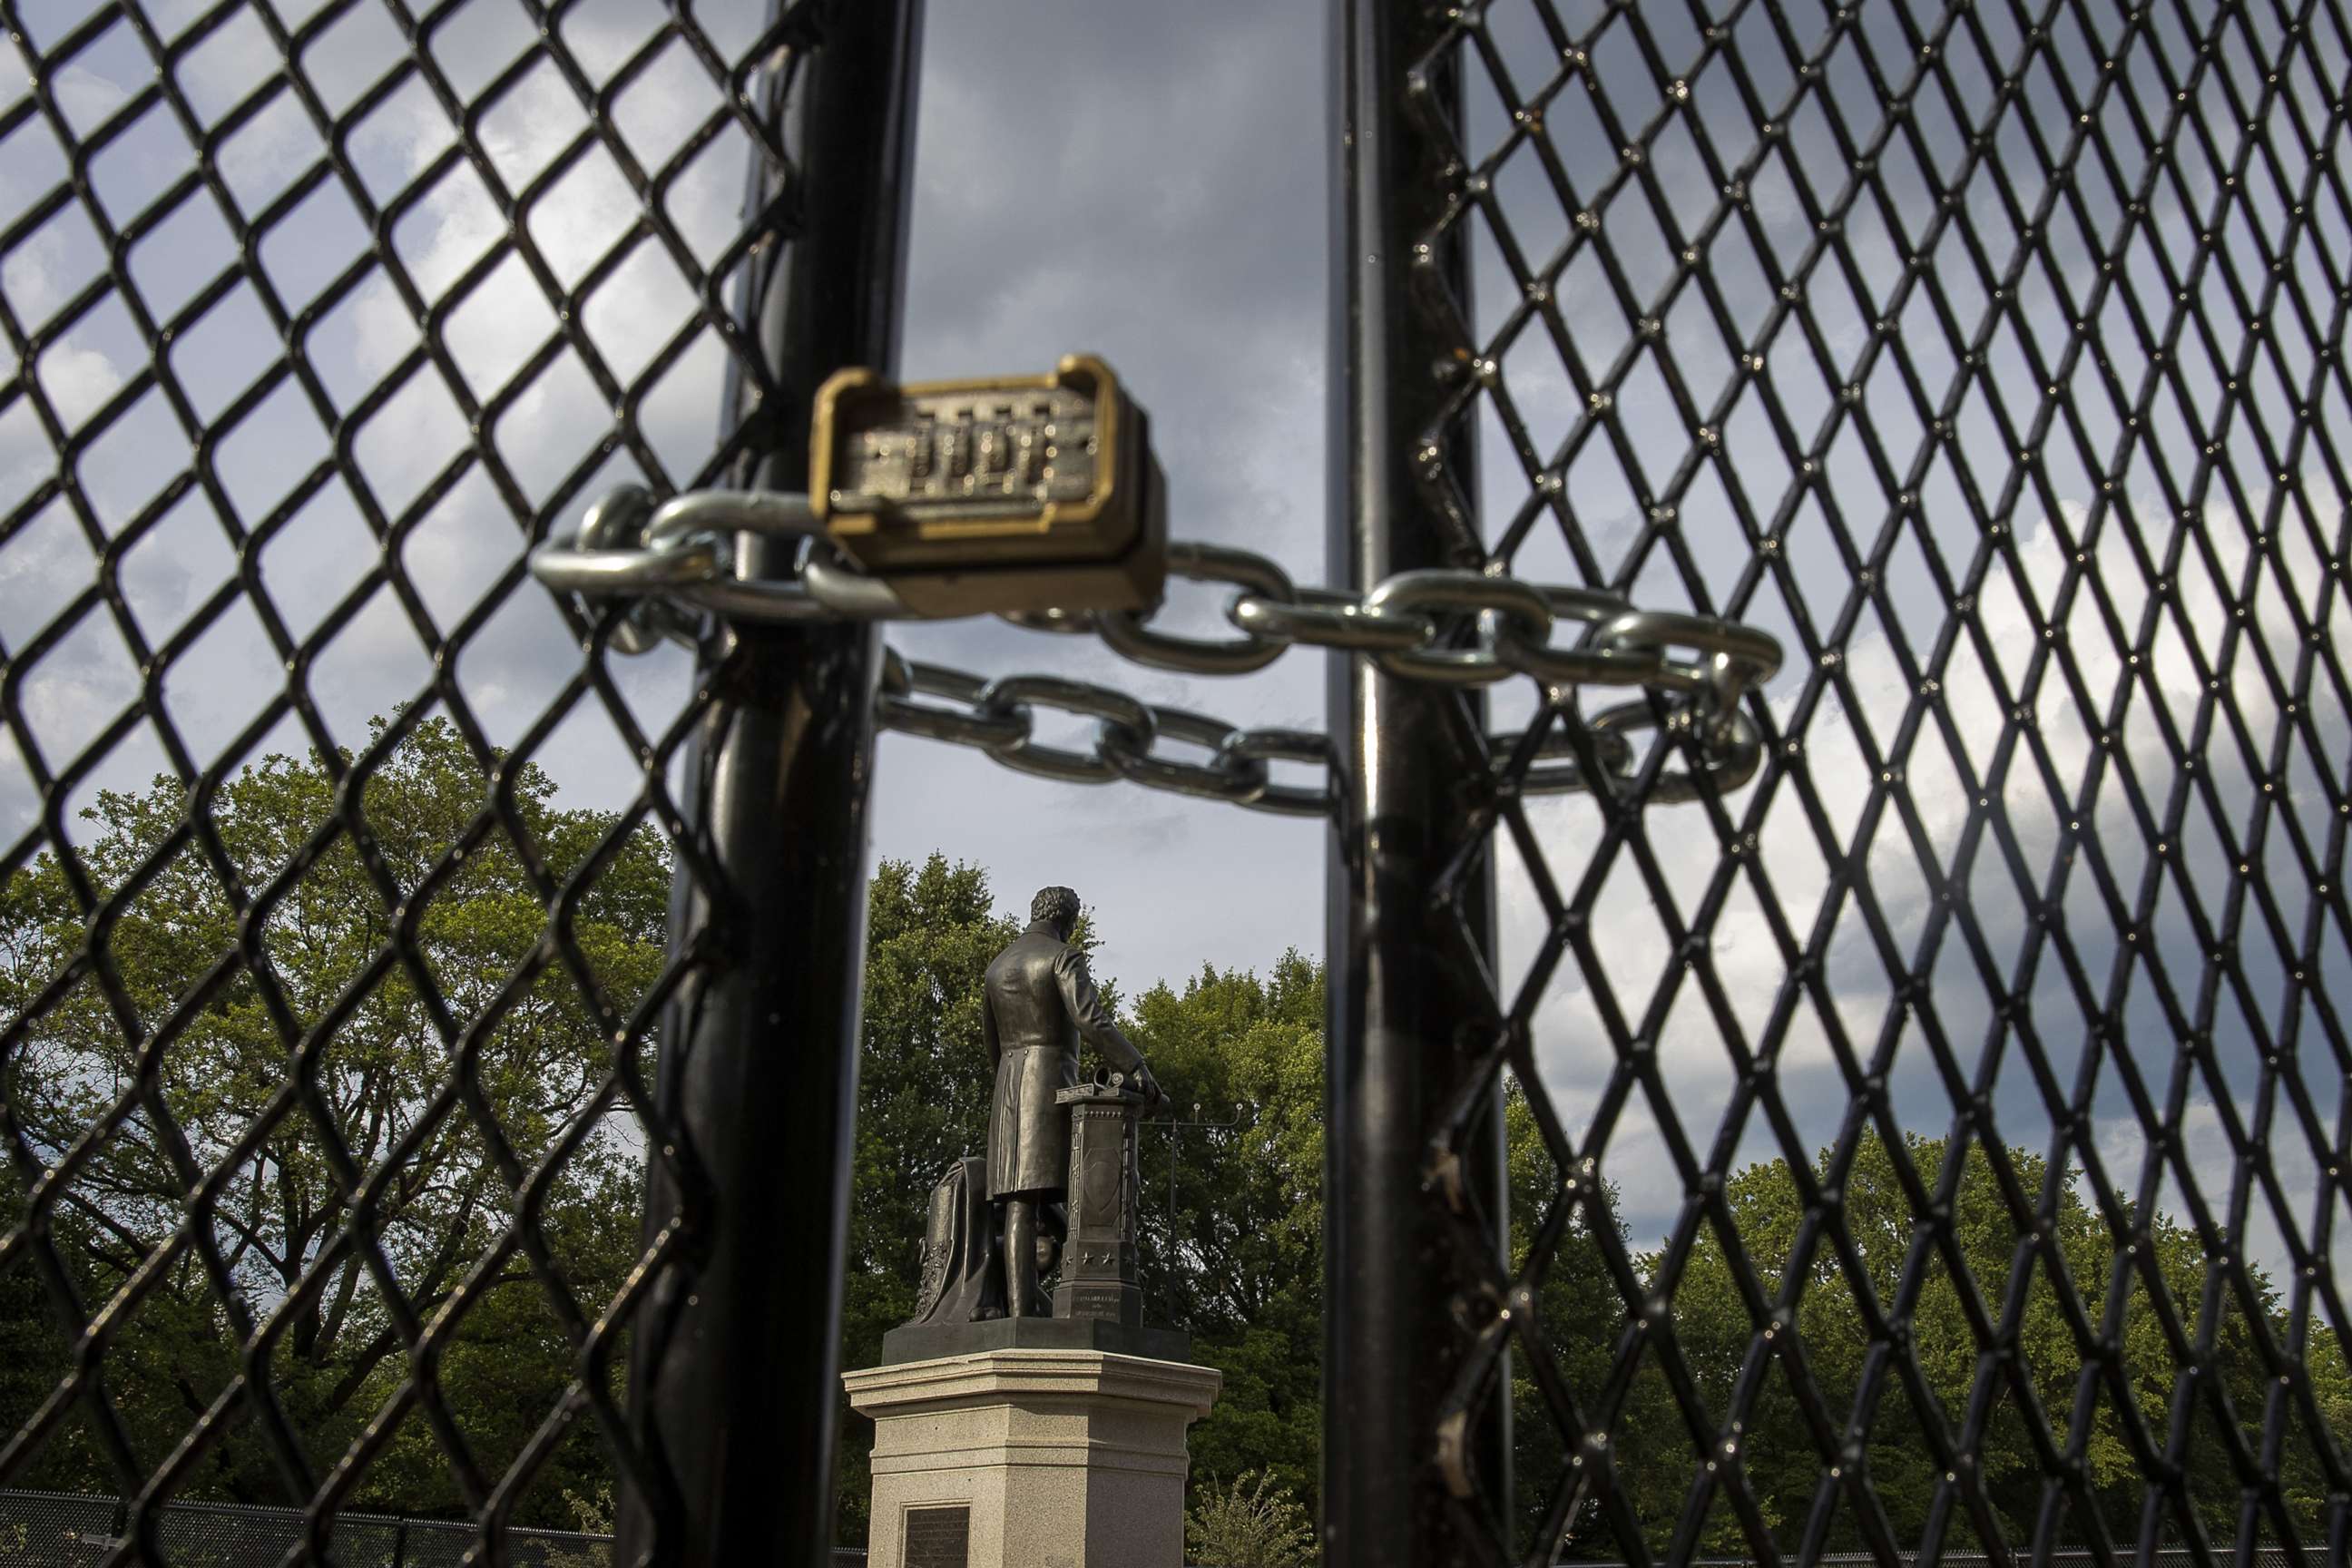 PHOTO: *A locked gate surrounds the Emancipation Memorial debate in Lincoln Park, June 26, 2020, in Washington, D.C., to protect it as controversy and protests erupted around monuments that many find offensive.